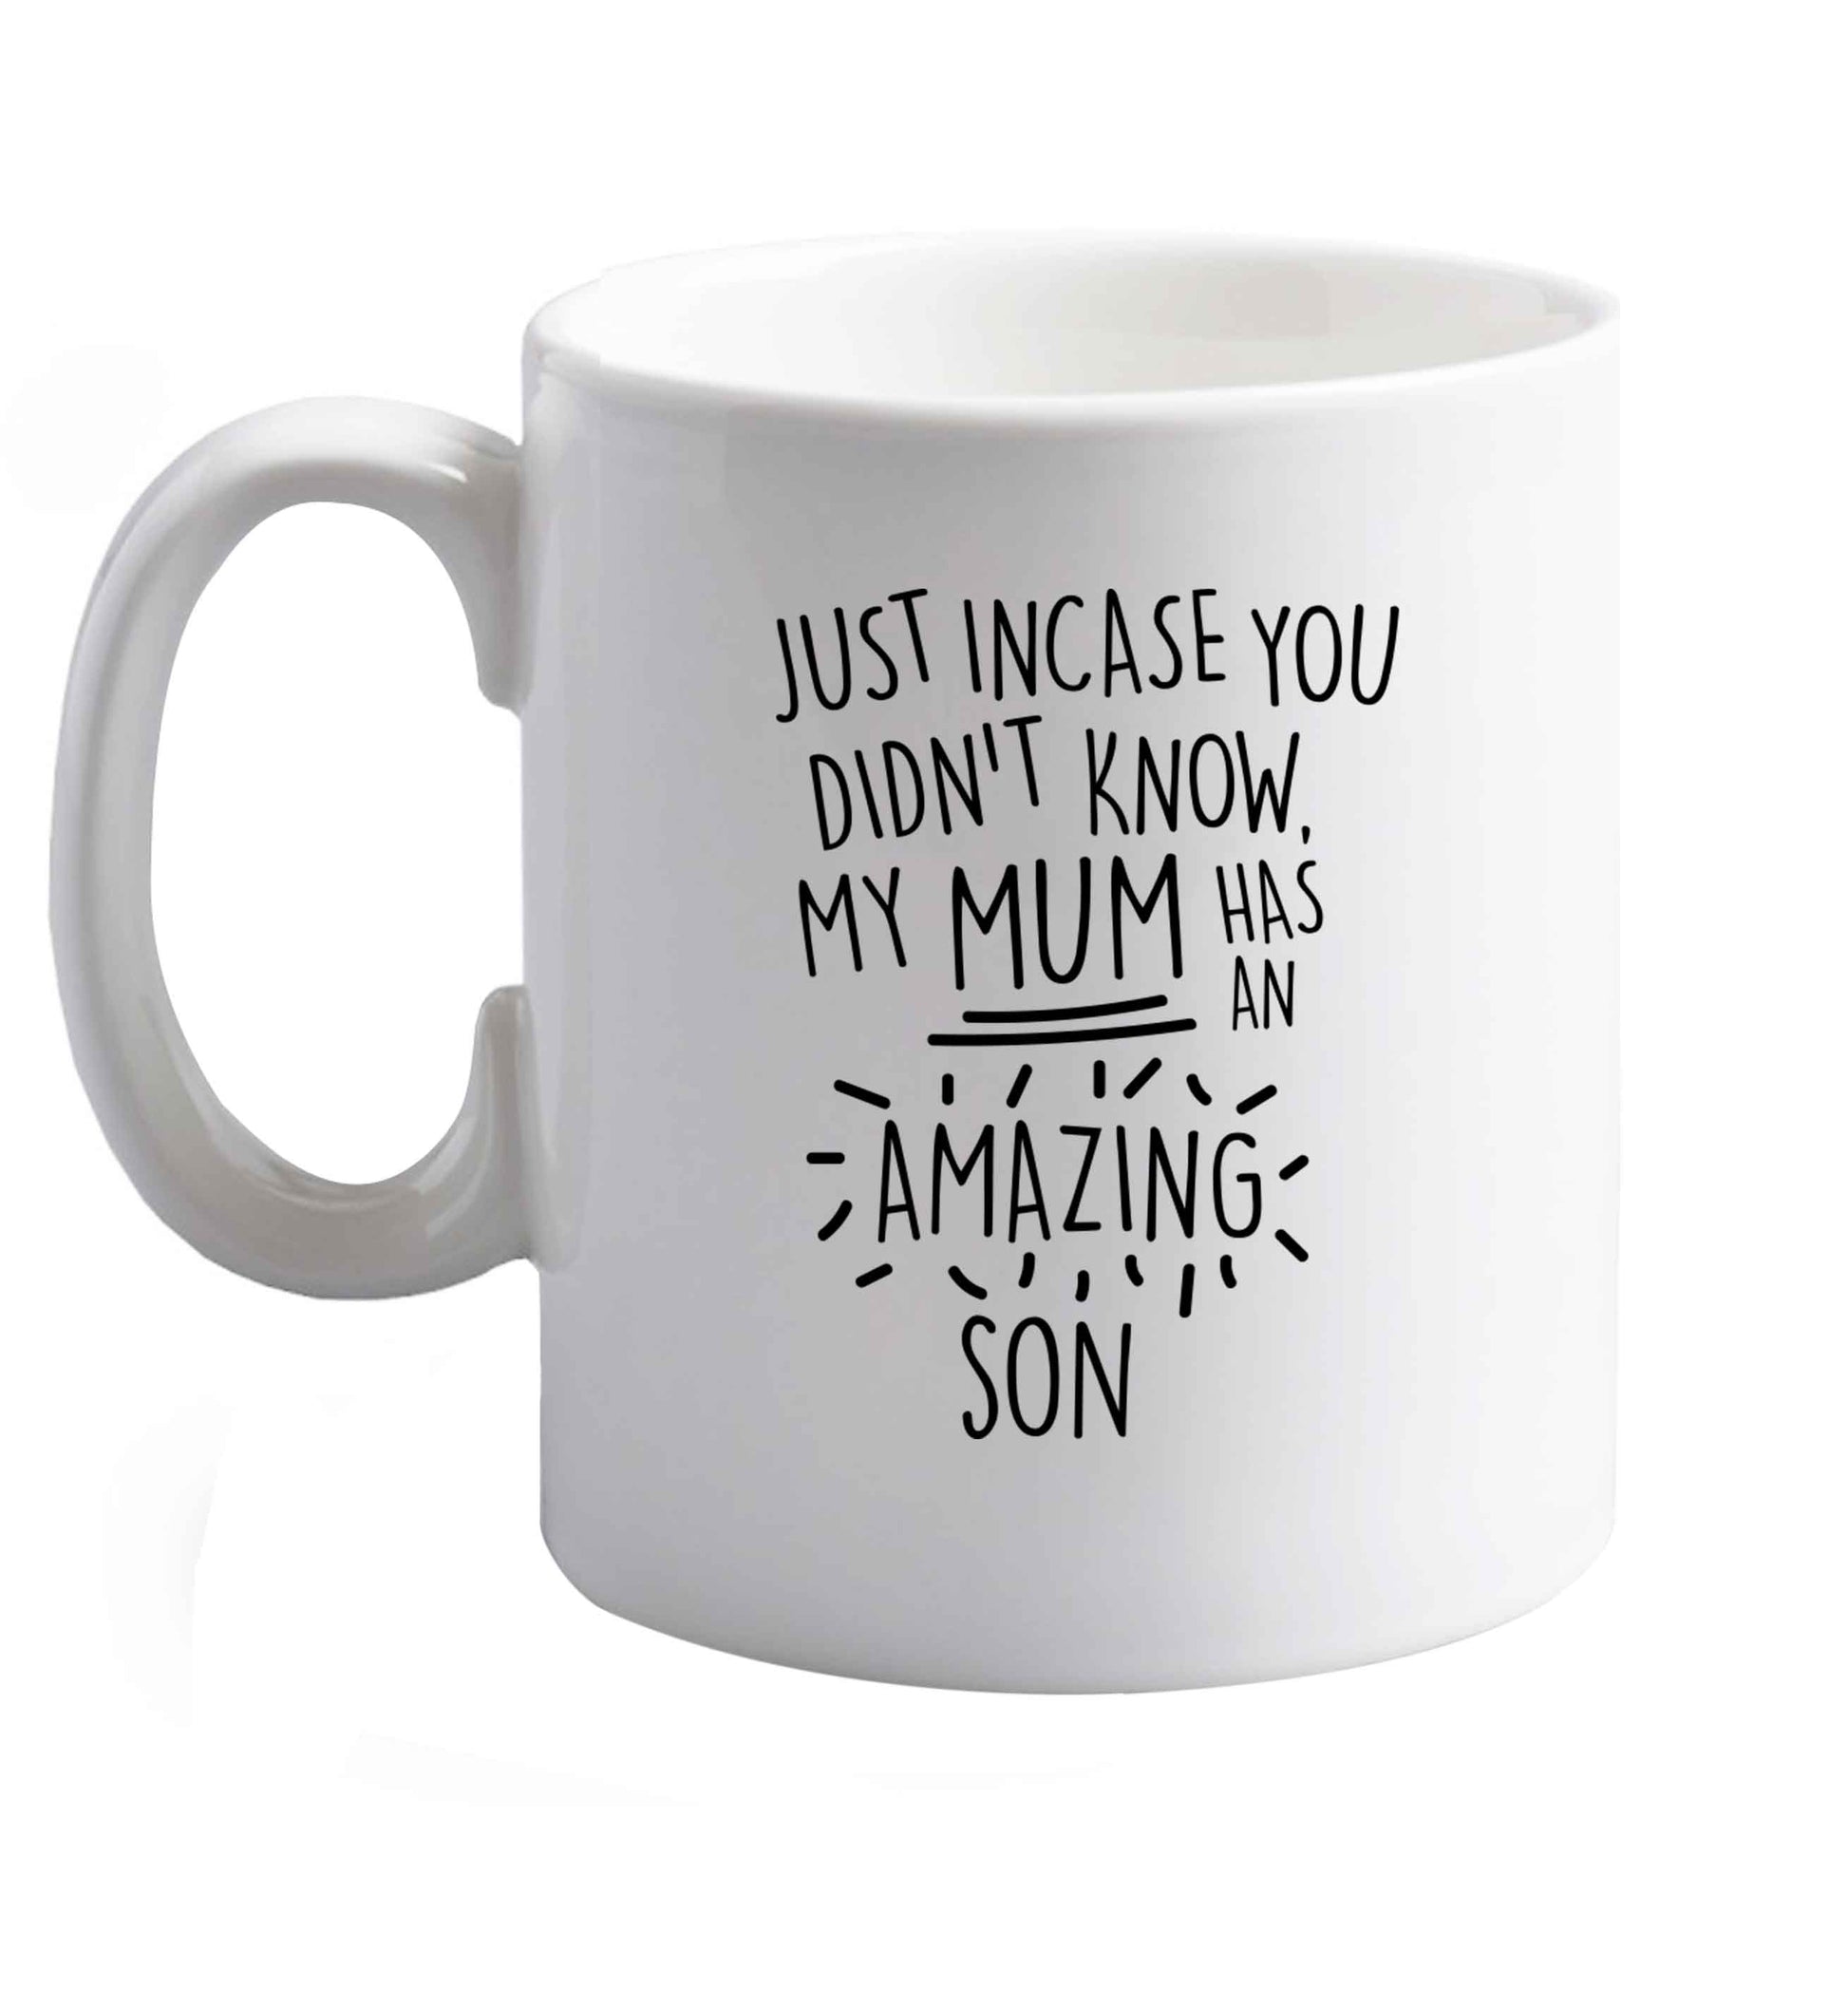 10 oz Just incase you didn't know my mum has an amazing son ceramic mug right handed